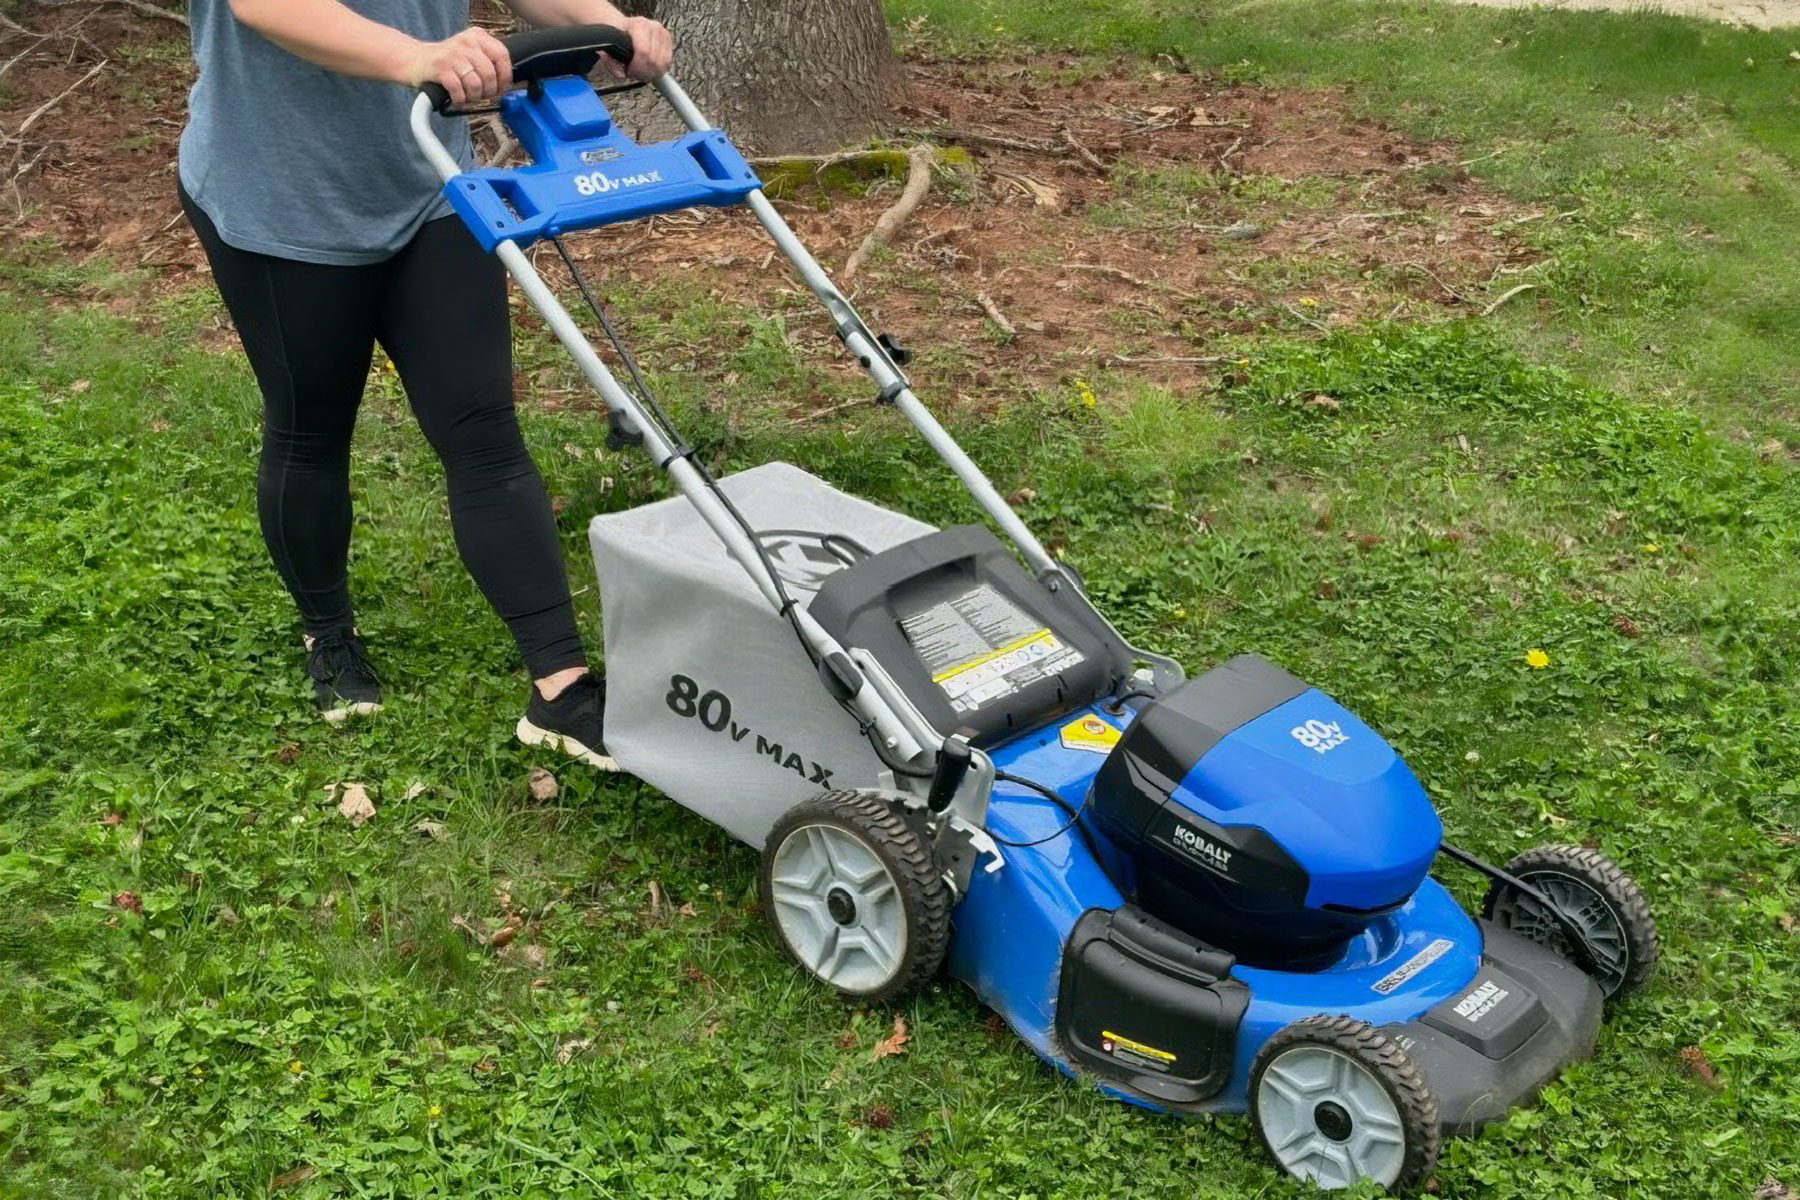 A woman using a Mower for cutting grass in the front yard